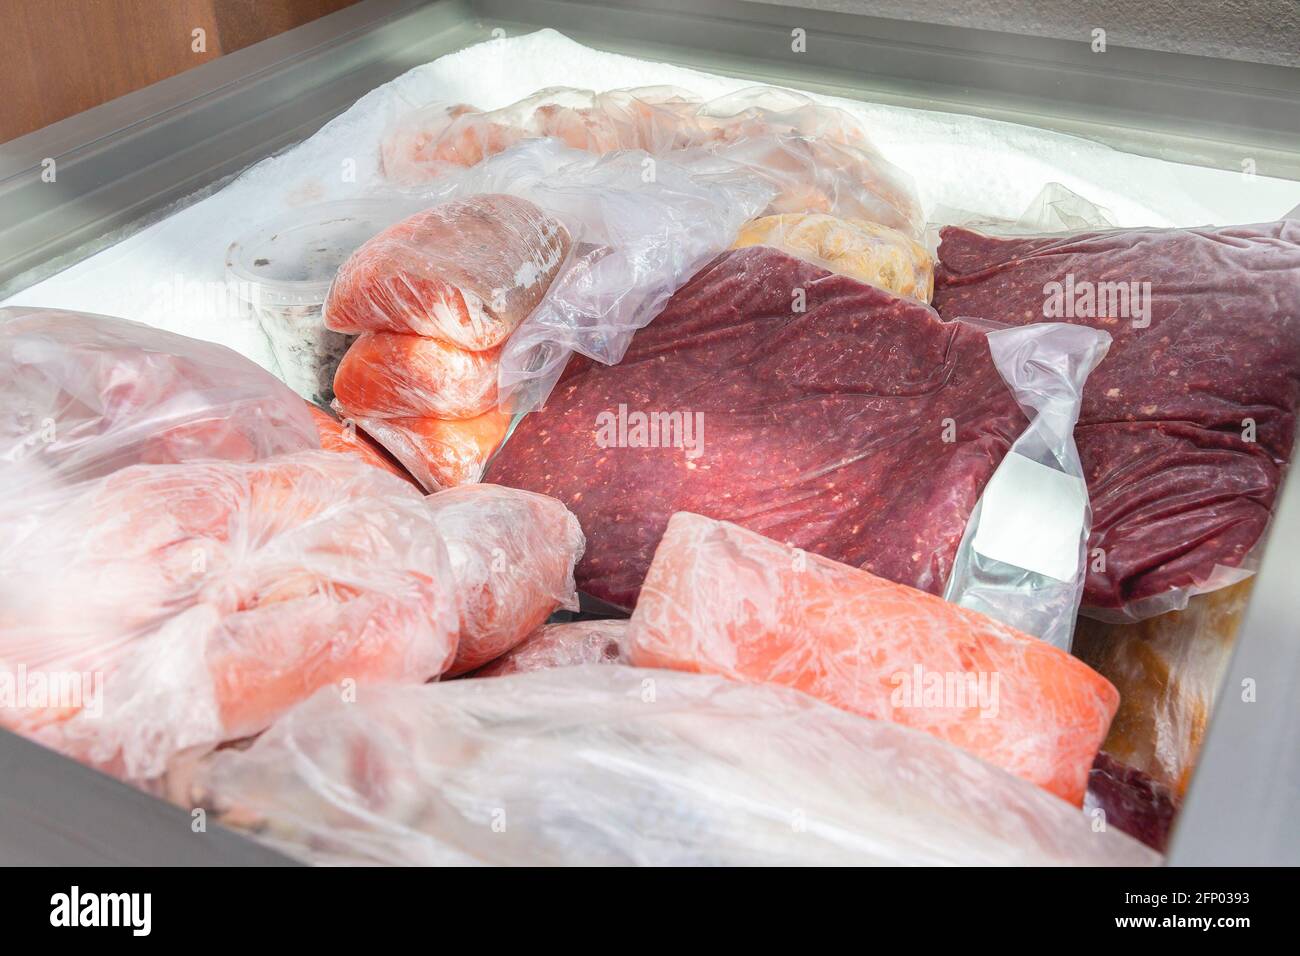 https://c8.alamy.com/comp/2FP0393/frozen-food-in-the-freezer-bagged-frozen-meat-and-other-foods-in-a-horizontal-freezer-food-preservation-in-low-temperatures-2FP0393.jpg